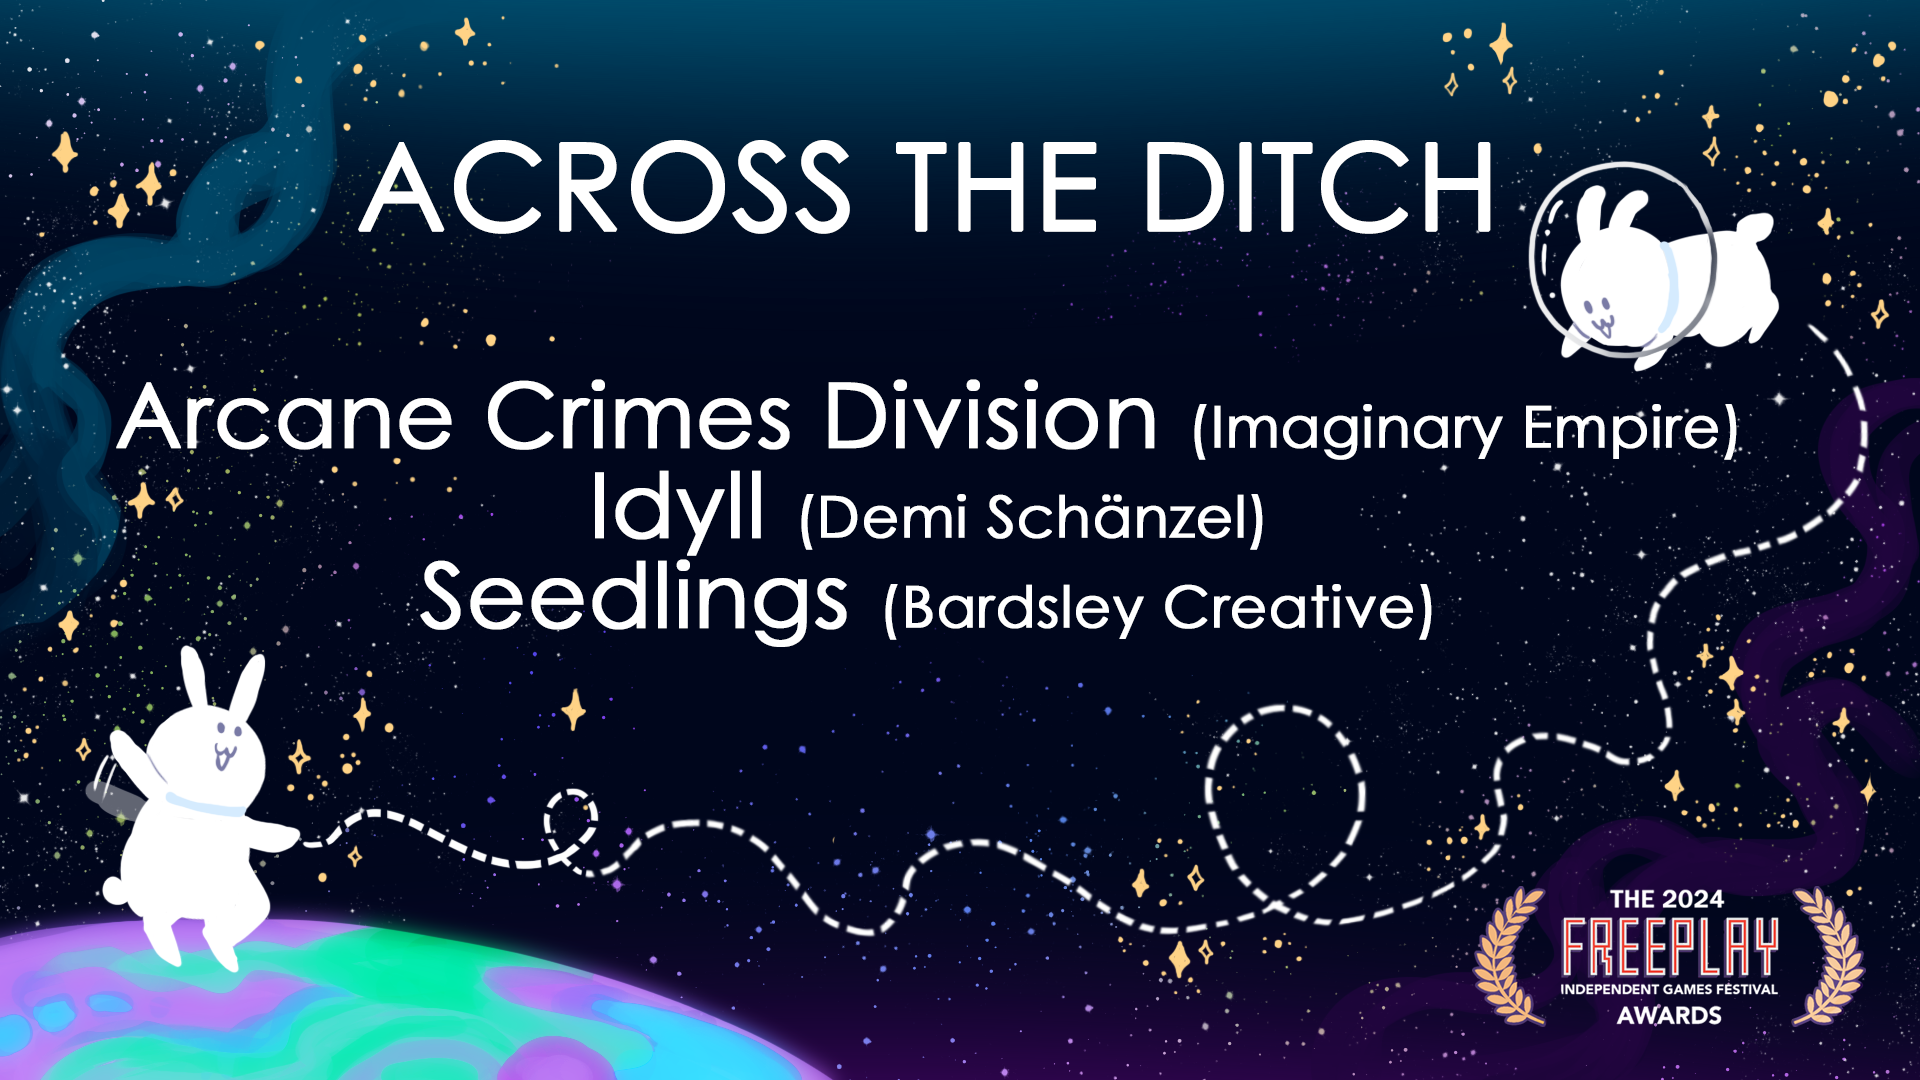 Across the ditch nominees